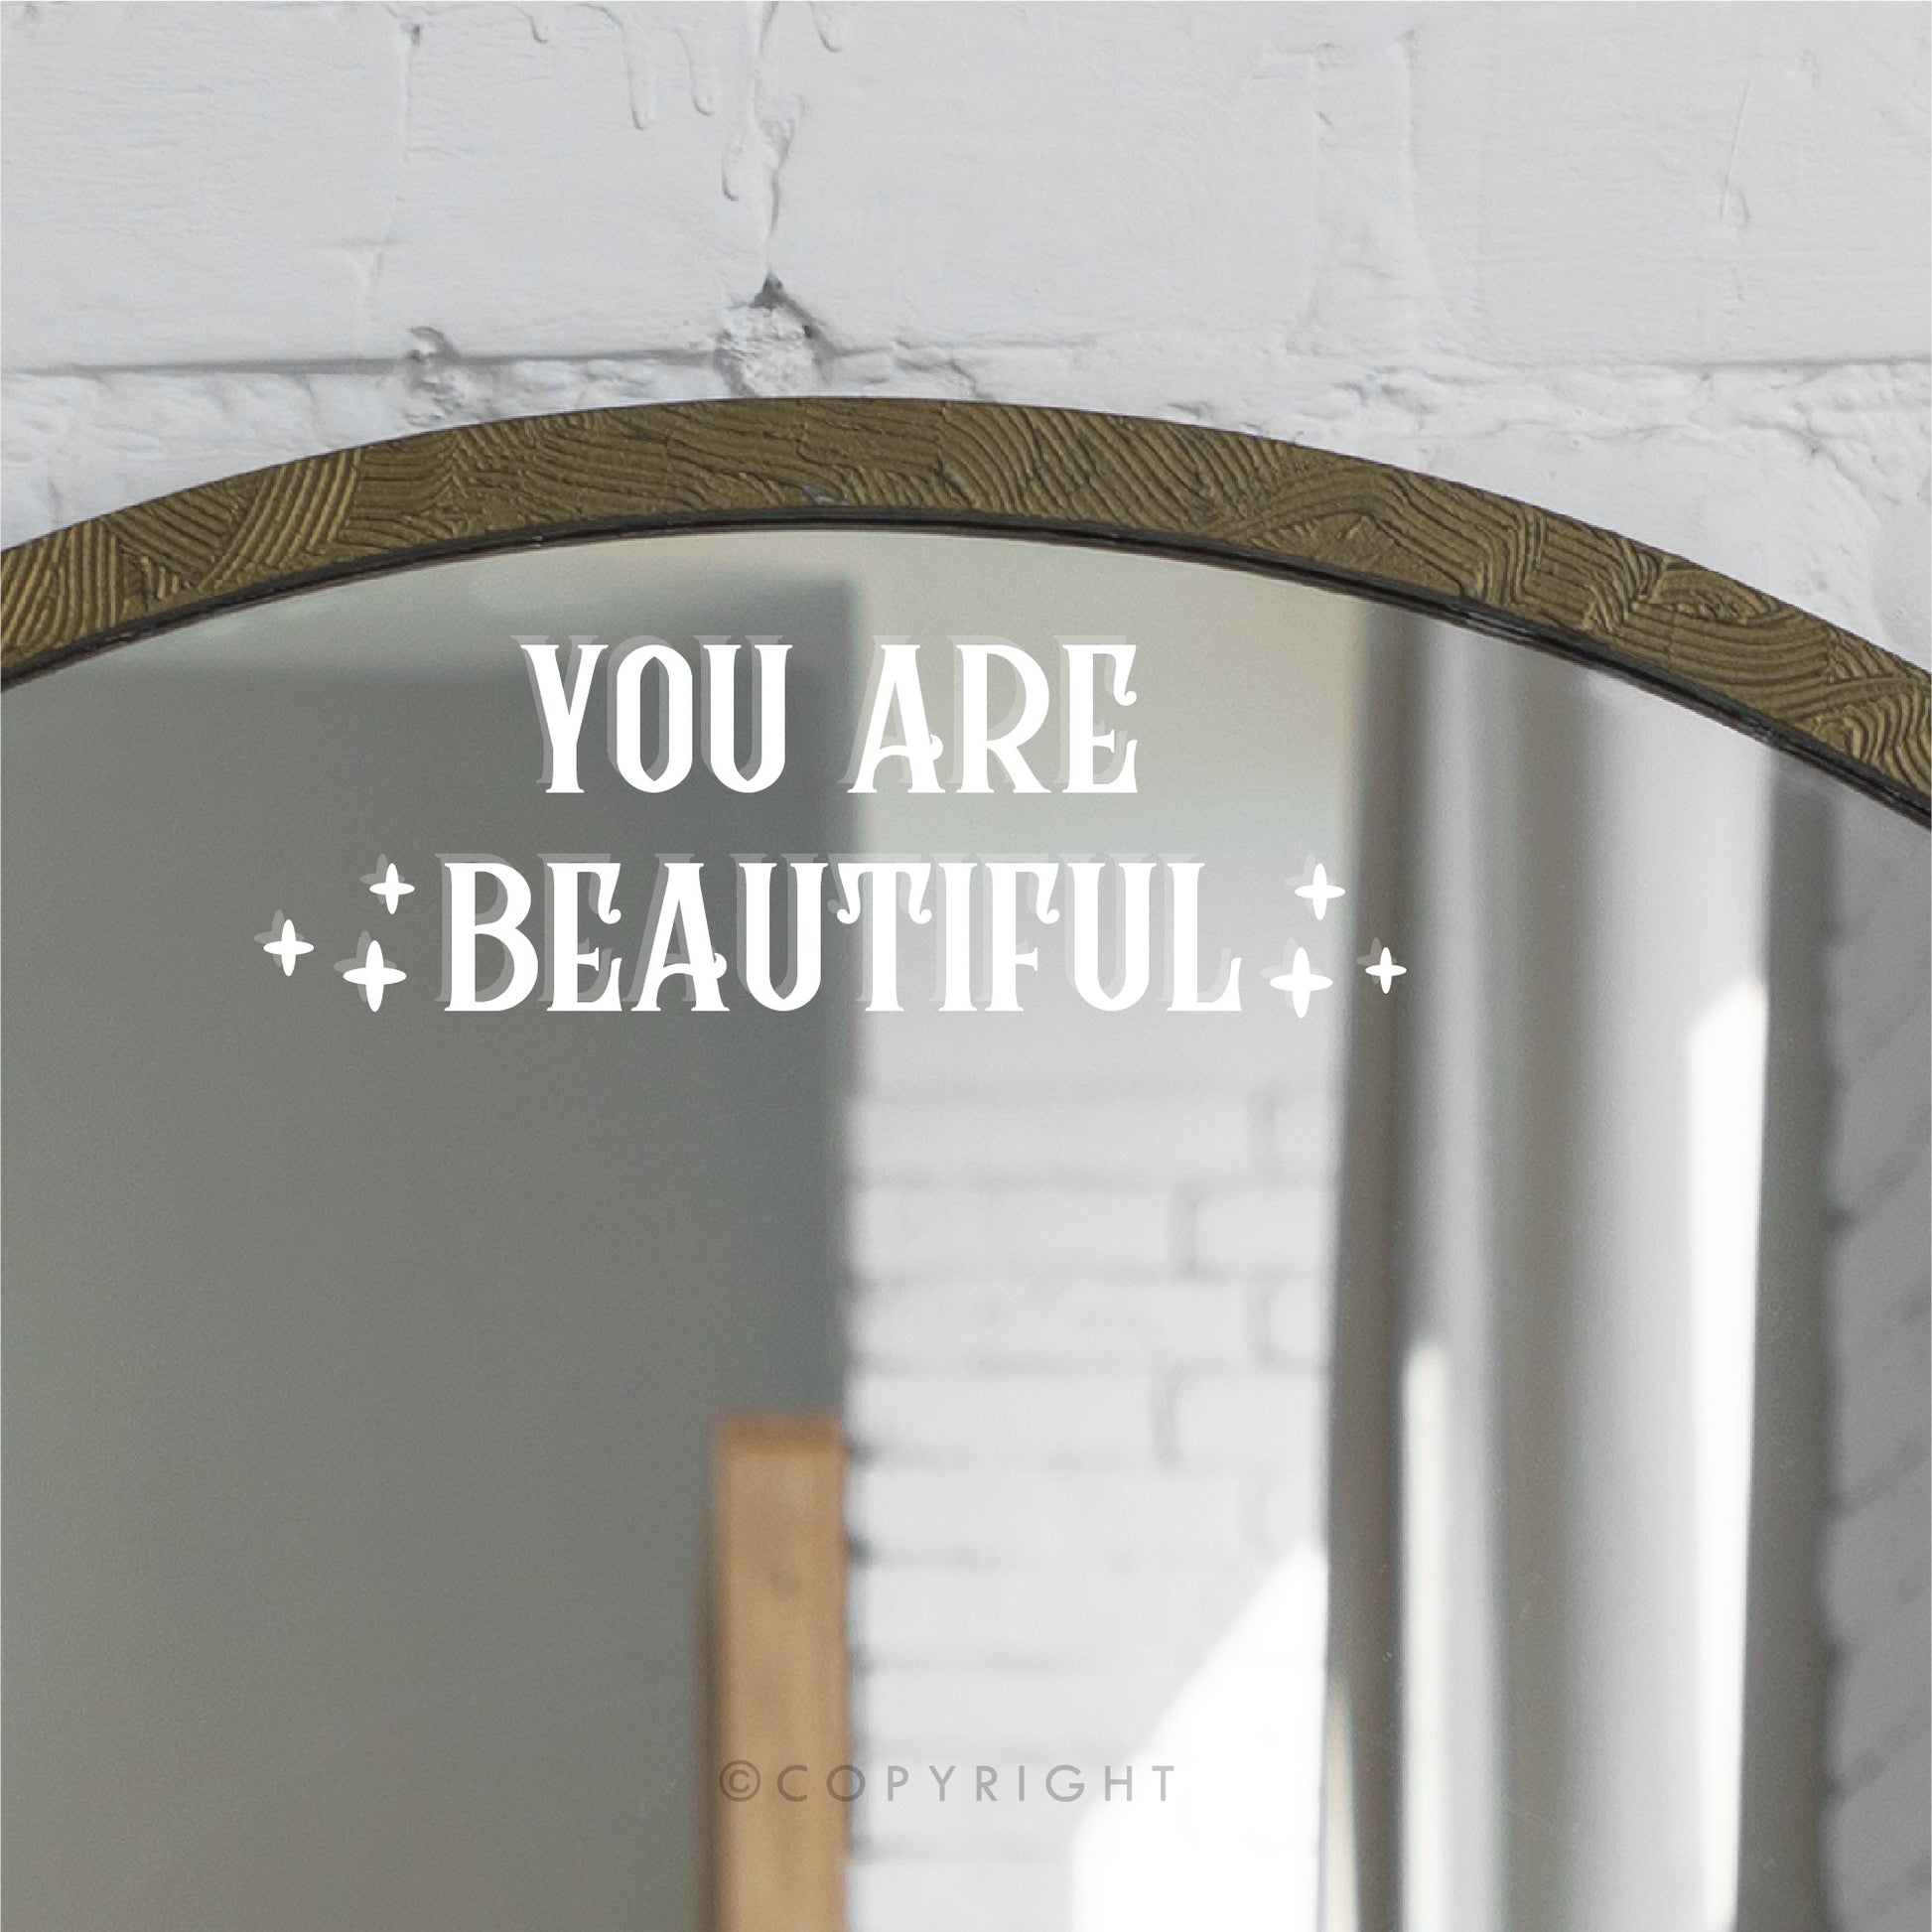 You Are Beautiful With Stars Positive Affirmation Decal Motivational Quote Vinyl Sticker Transfer Words Mirror Decal Salon Decor